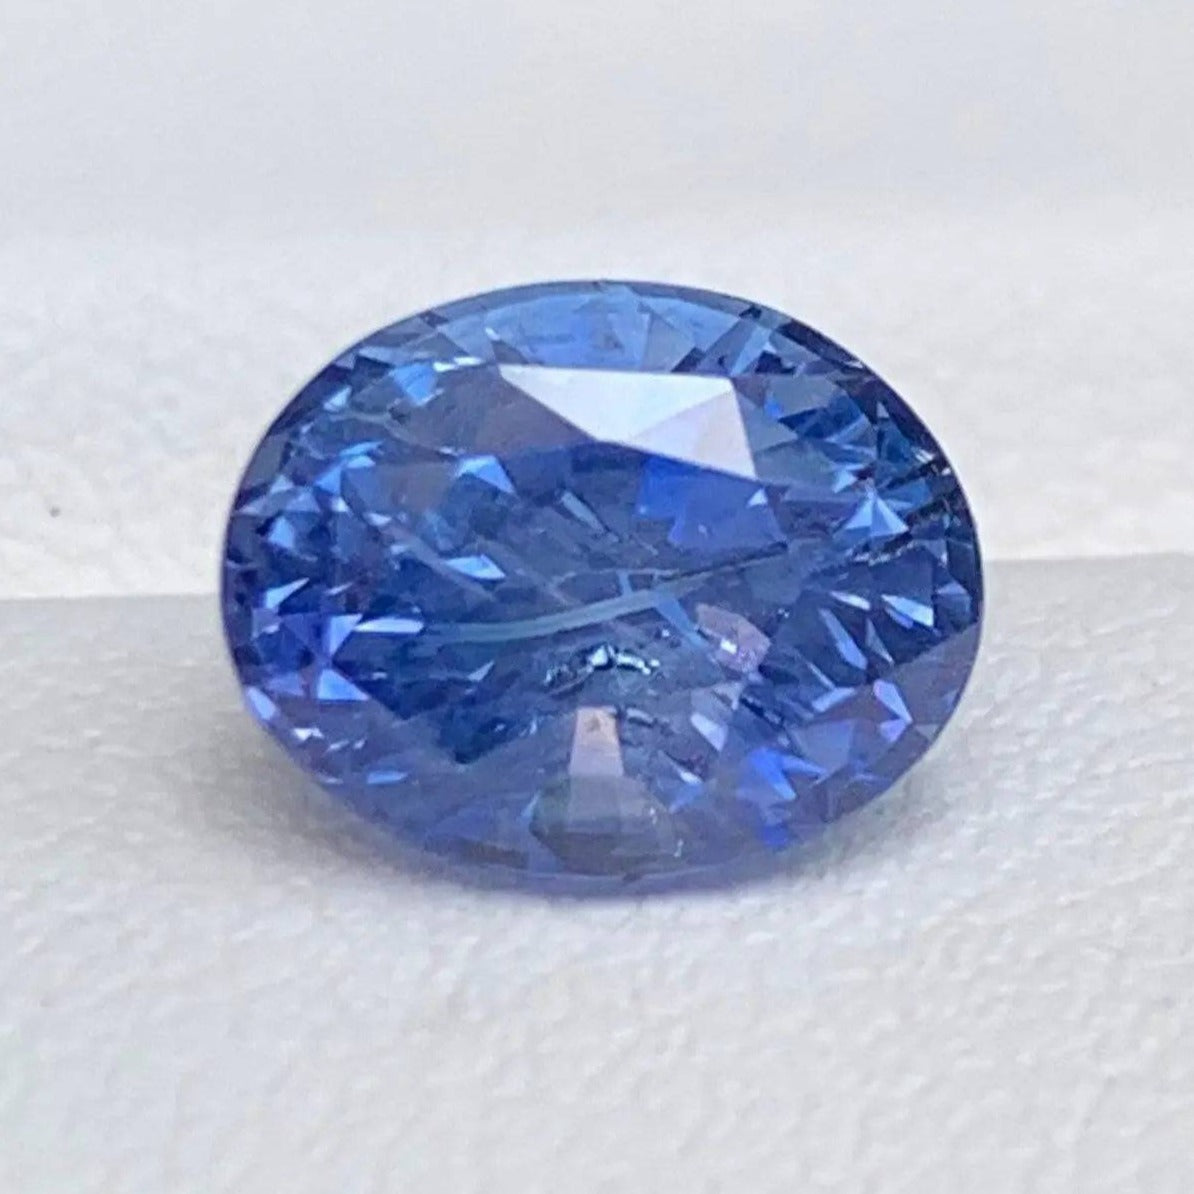 Blue sapphire 2.90 Cts, Natural Cornflower Blue Sapphire, Super Clarity Blue sapphire for Engagement ring, Ceylon Blue Sapphire Gift for her - Baza Boutique 